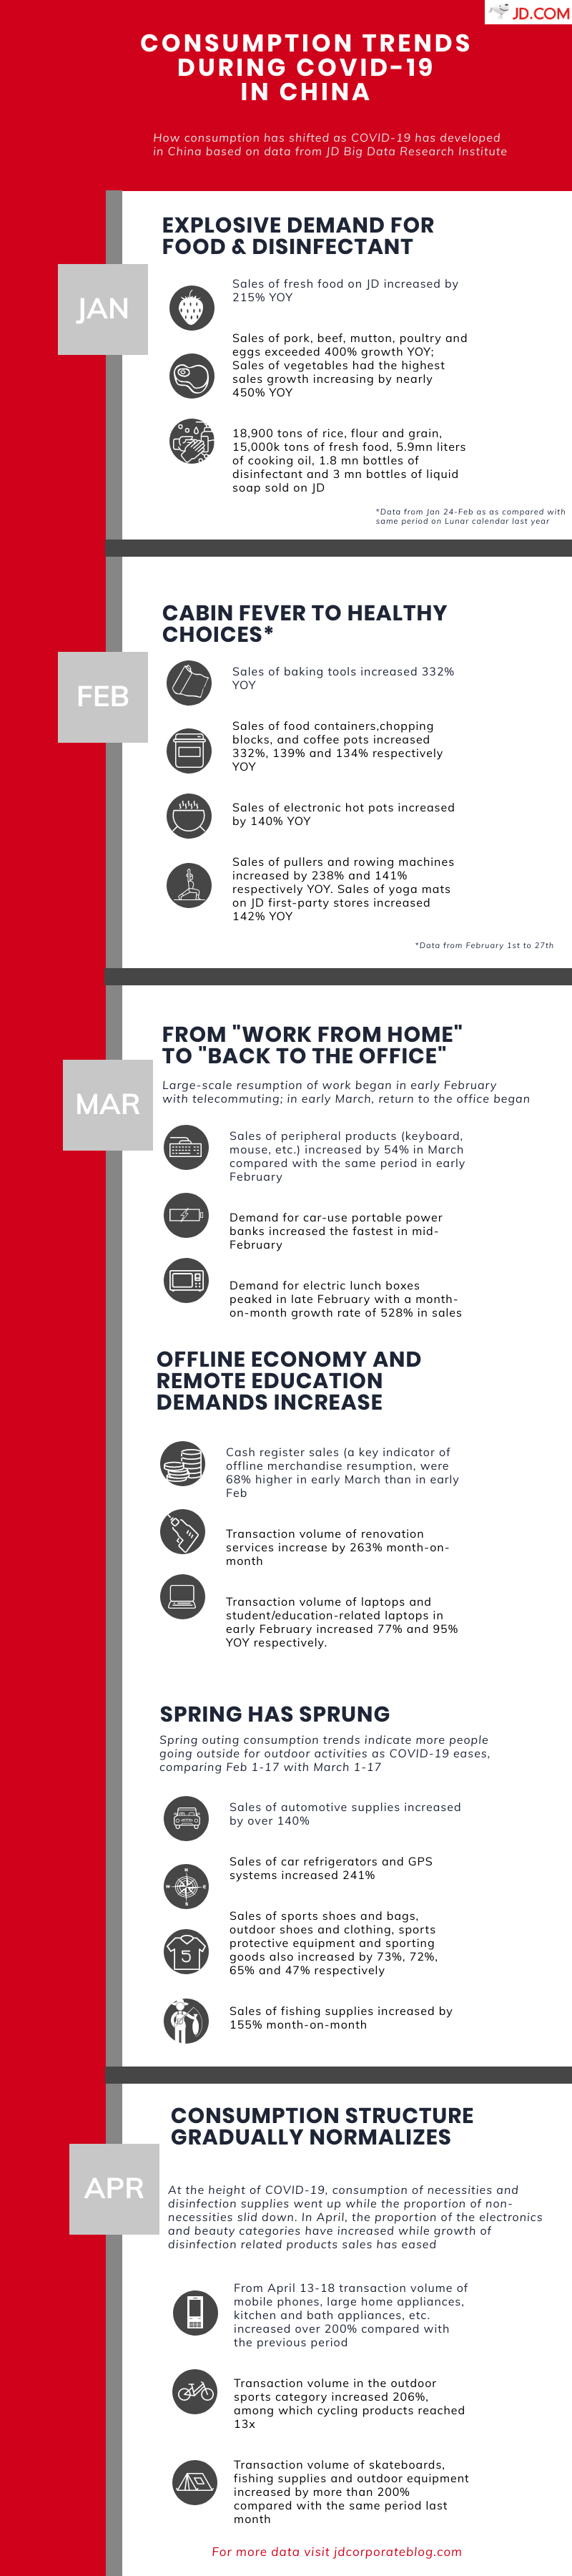 The infographic illustrates some of the changes in consumption over the past several months, as seen from JD.com data.